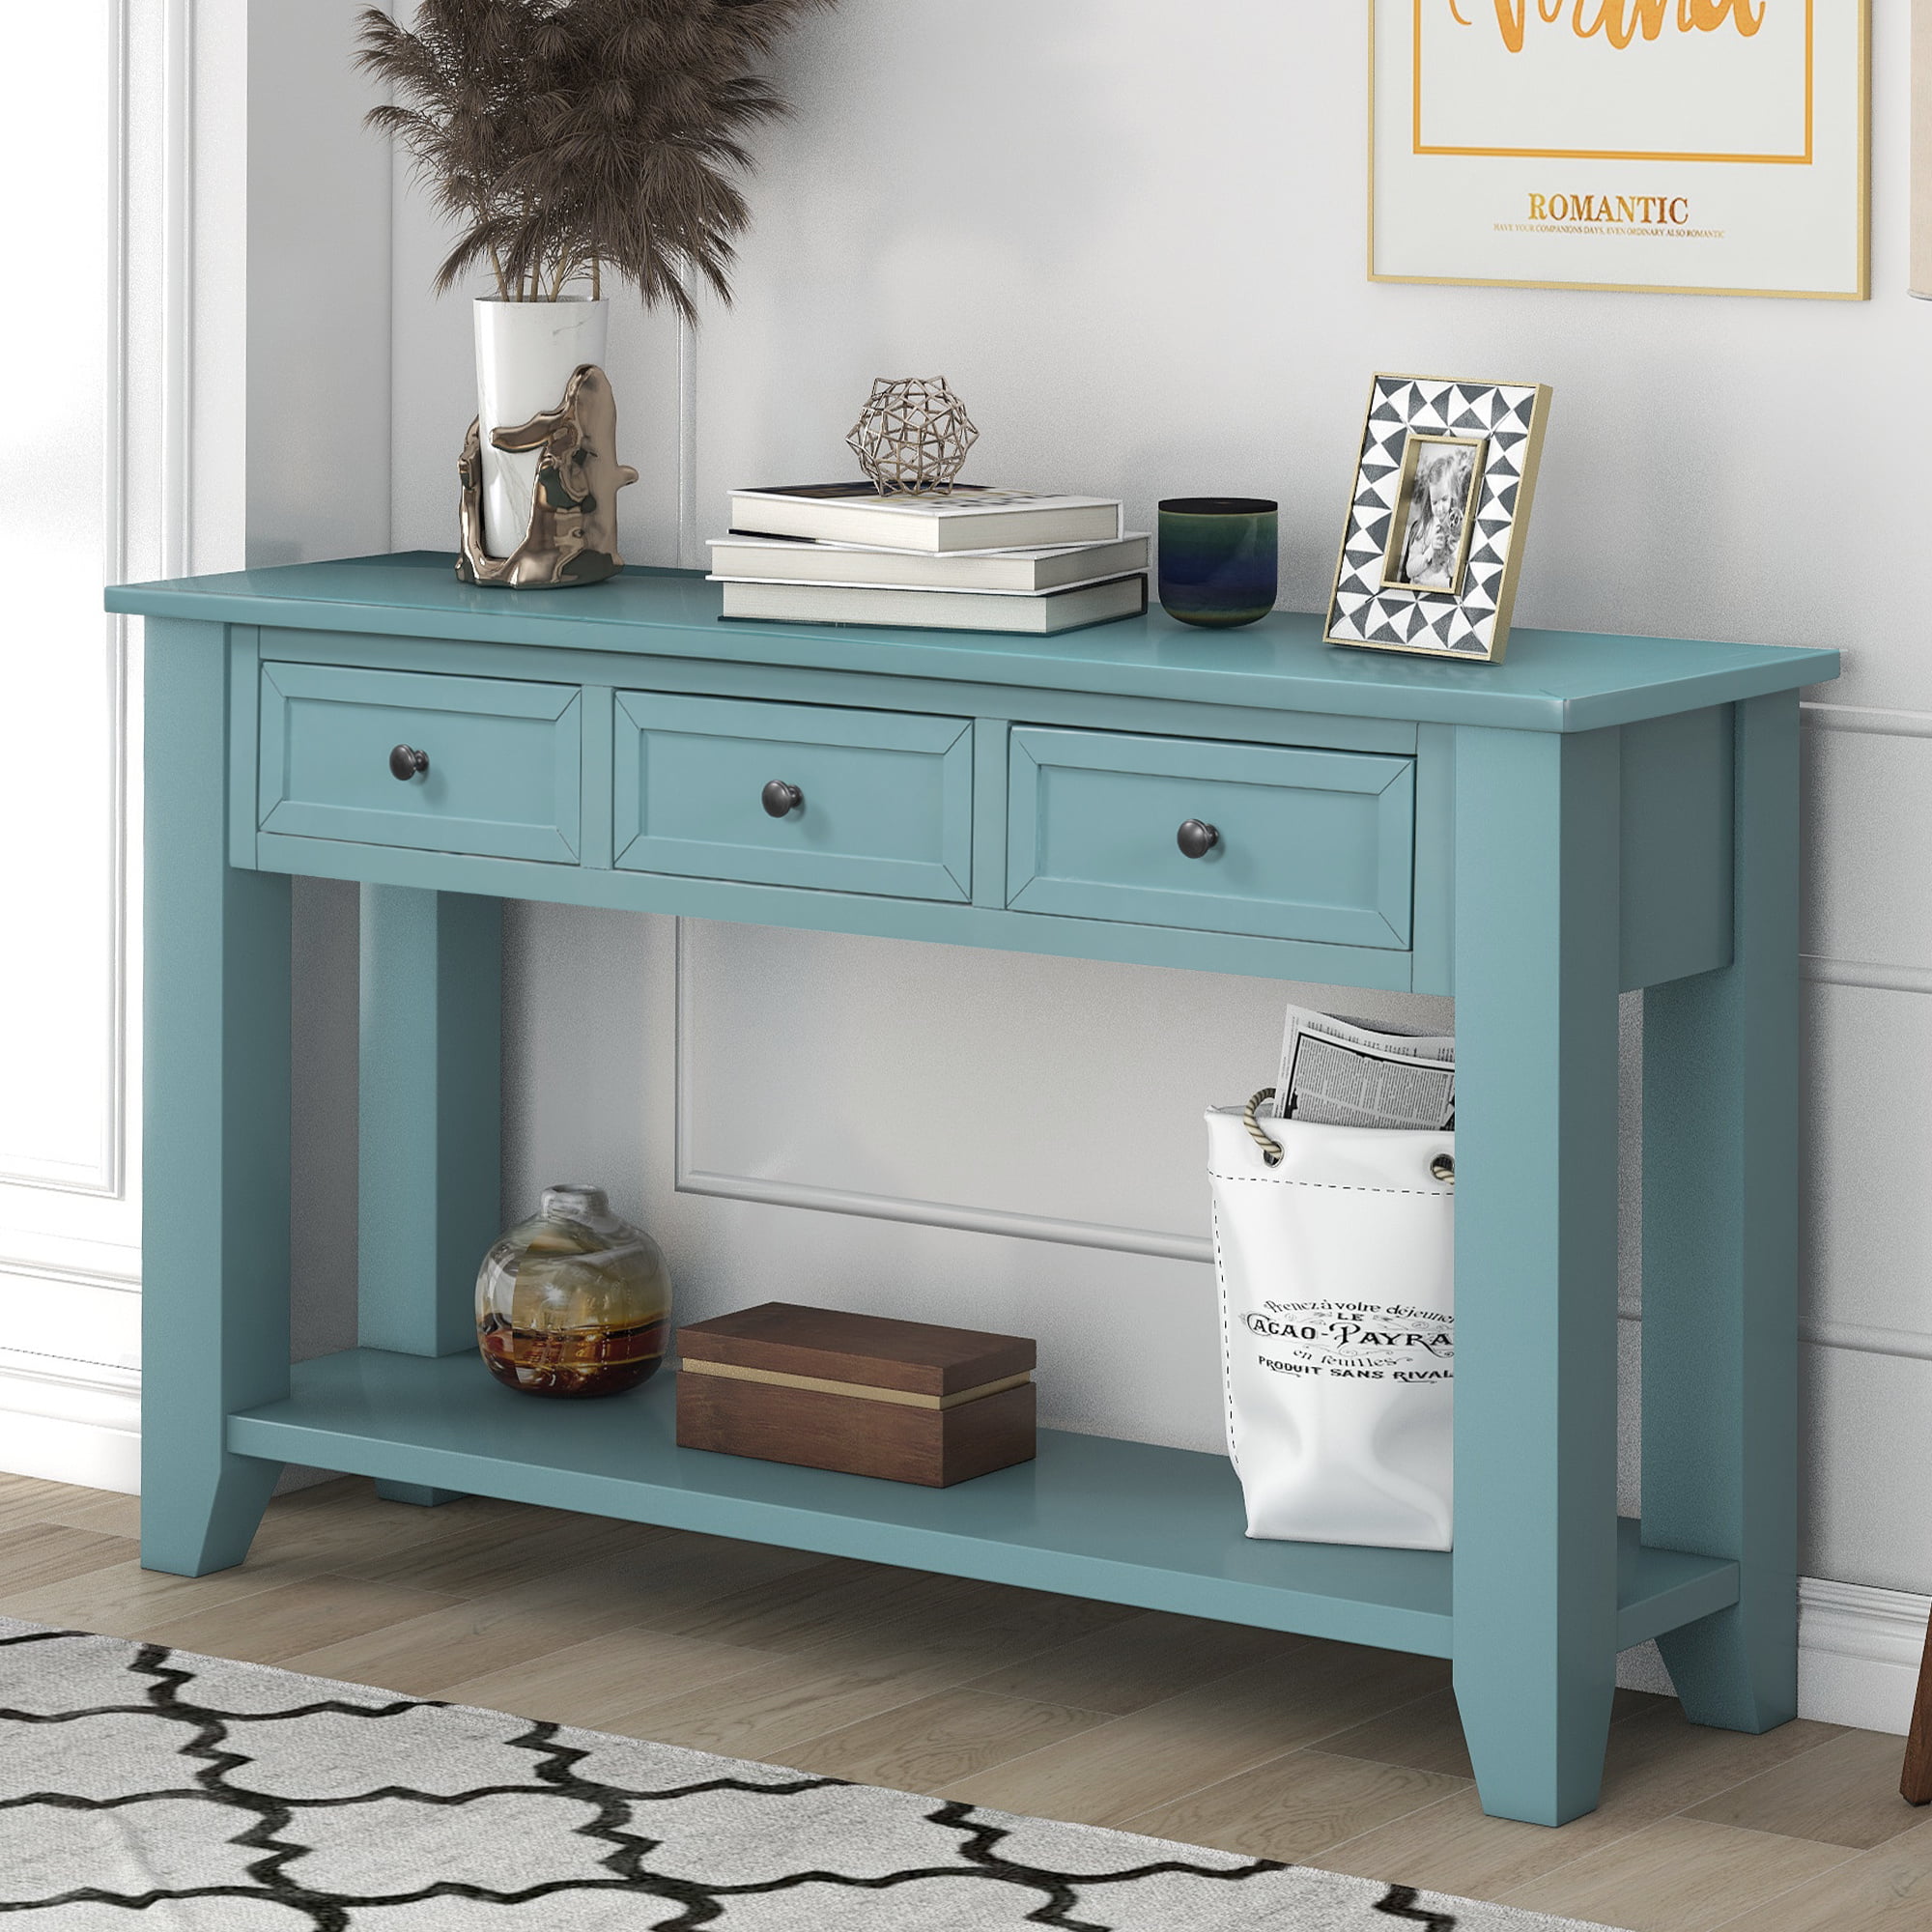 NEW Teal Blue Console End Table Night Stand Wood Drawers Hallway Accent Storage 